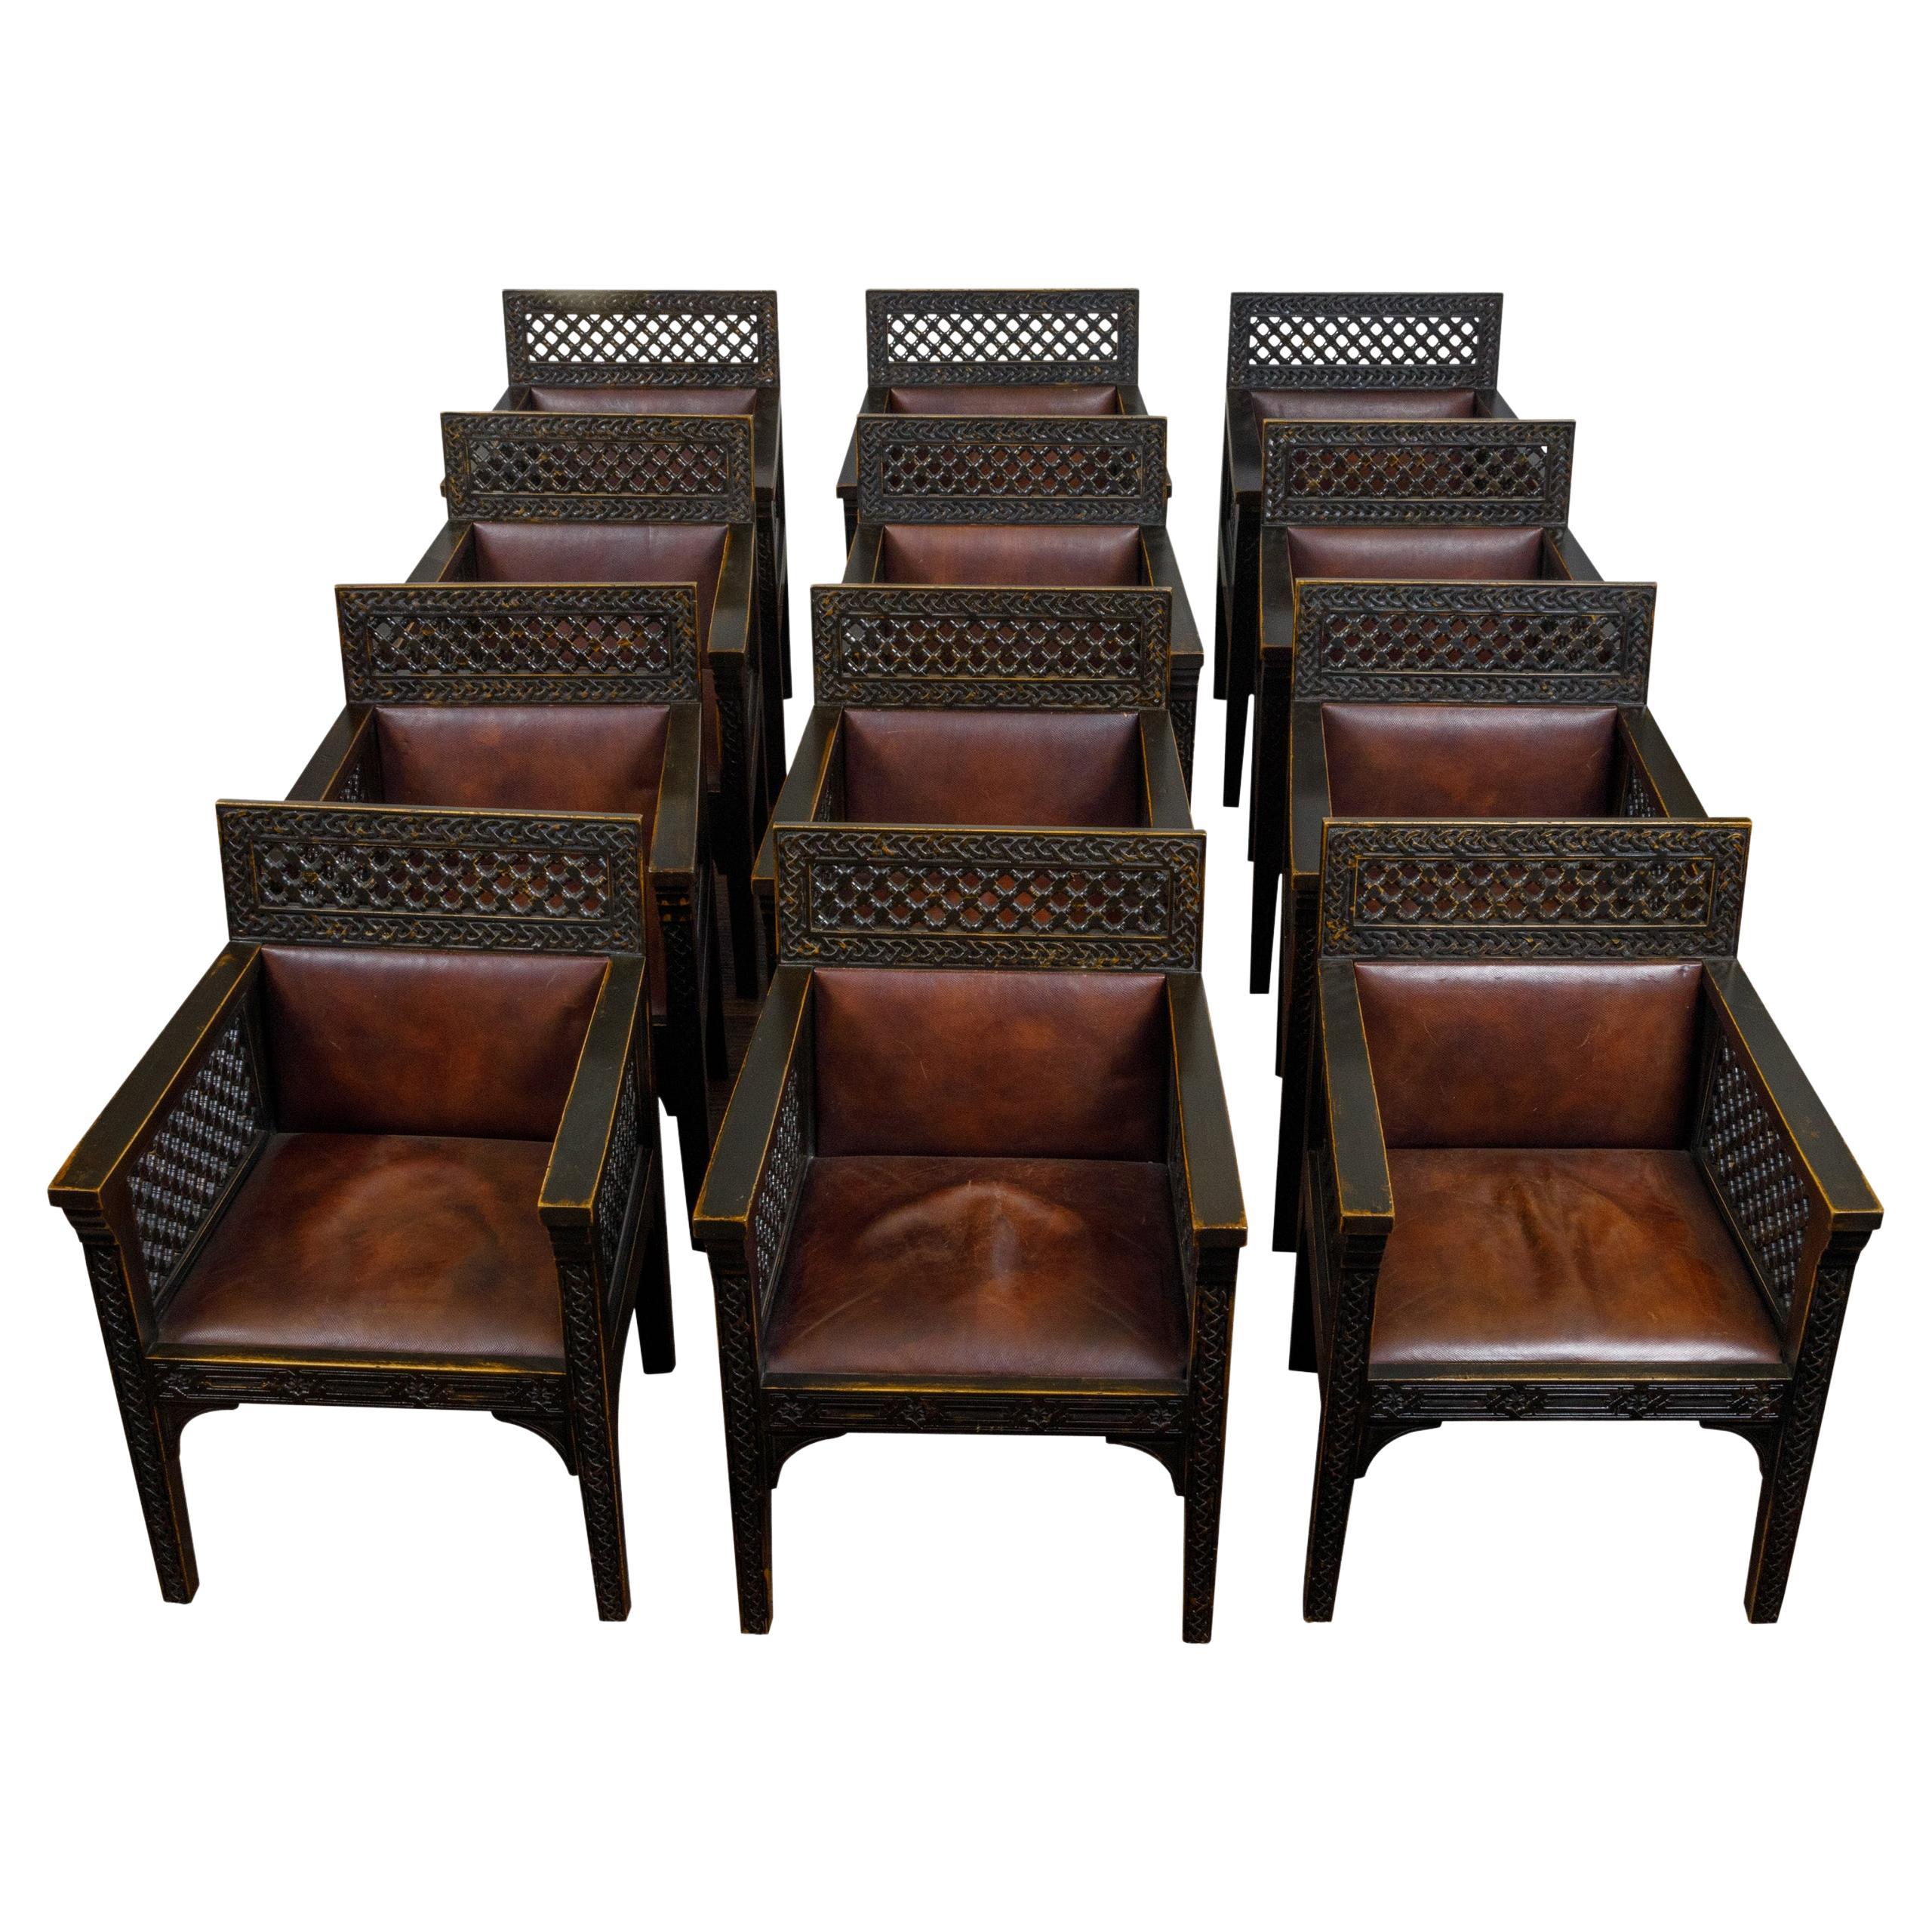 Set of 12 Moroccan Ebonized Carved Wood Armchairs with Leather Seats, circa 1900